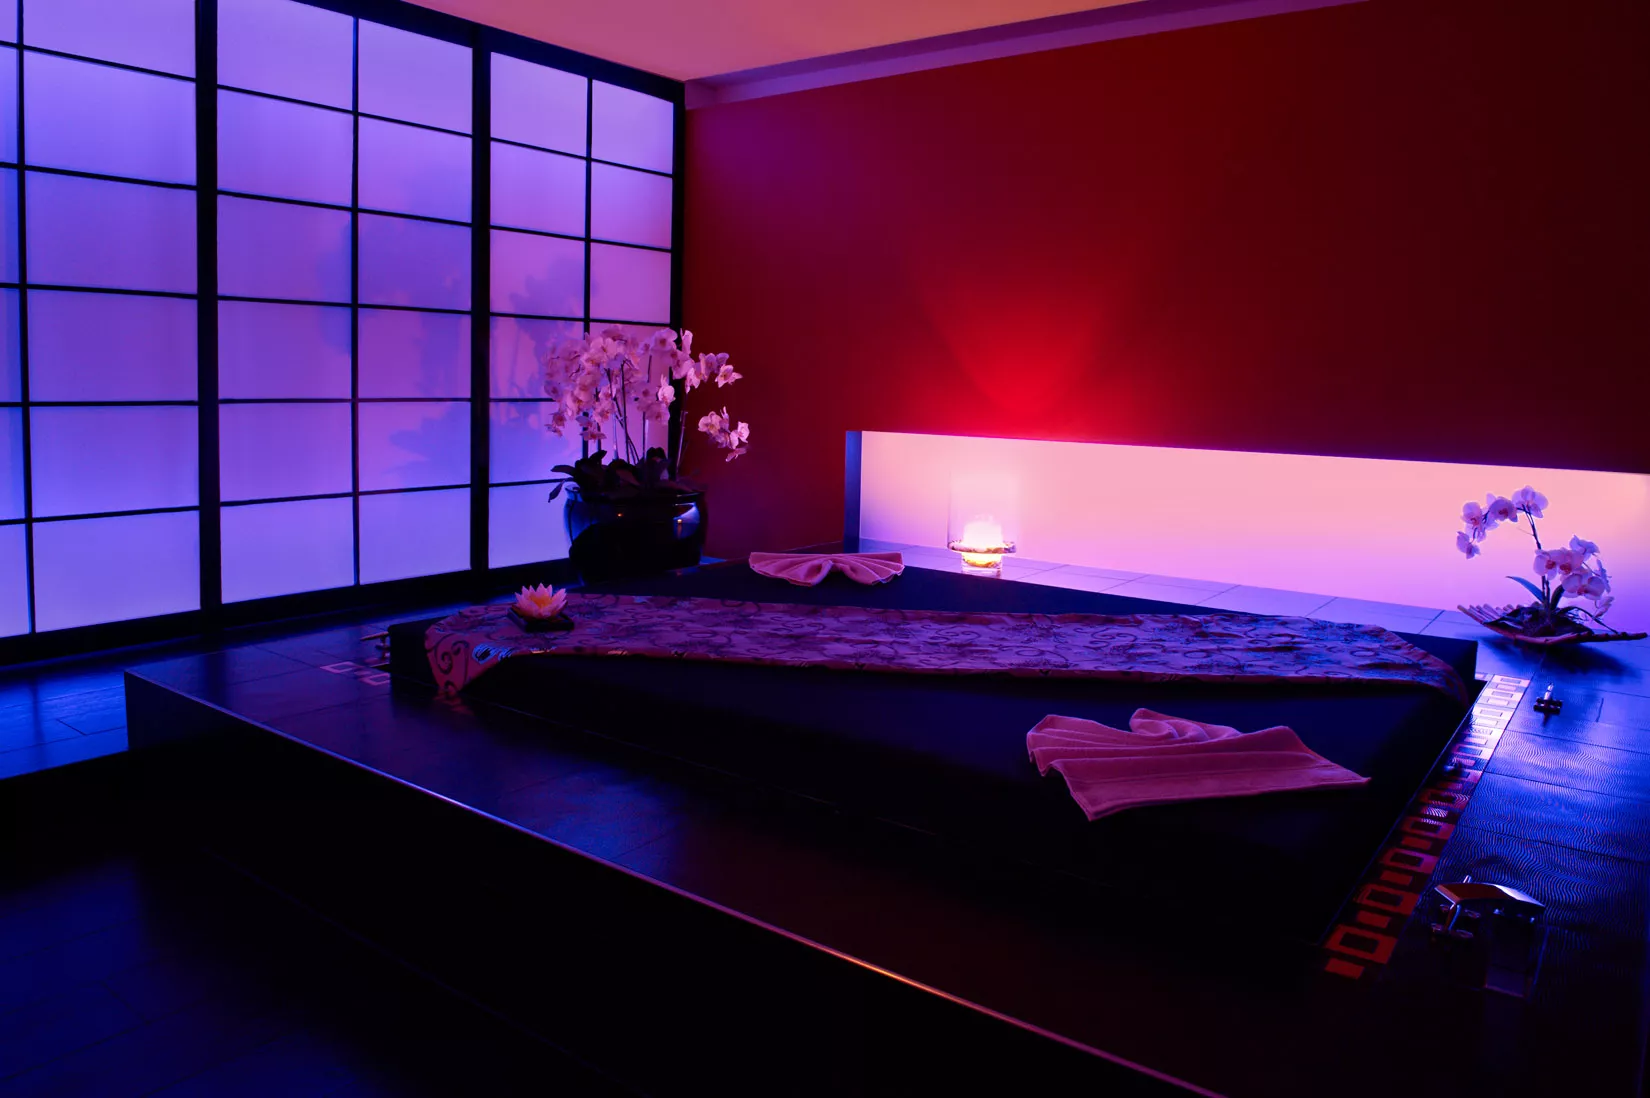 Andana Massage in Switzerland, Europe | Massage Parlors,Sex-Friendly Places - Rated 1.2